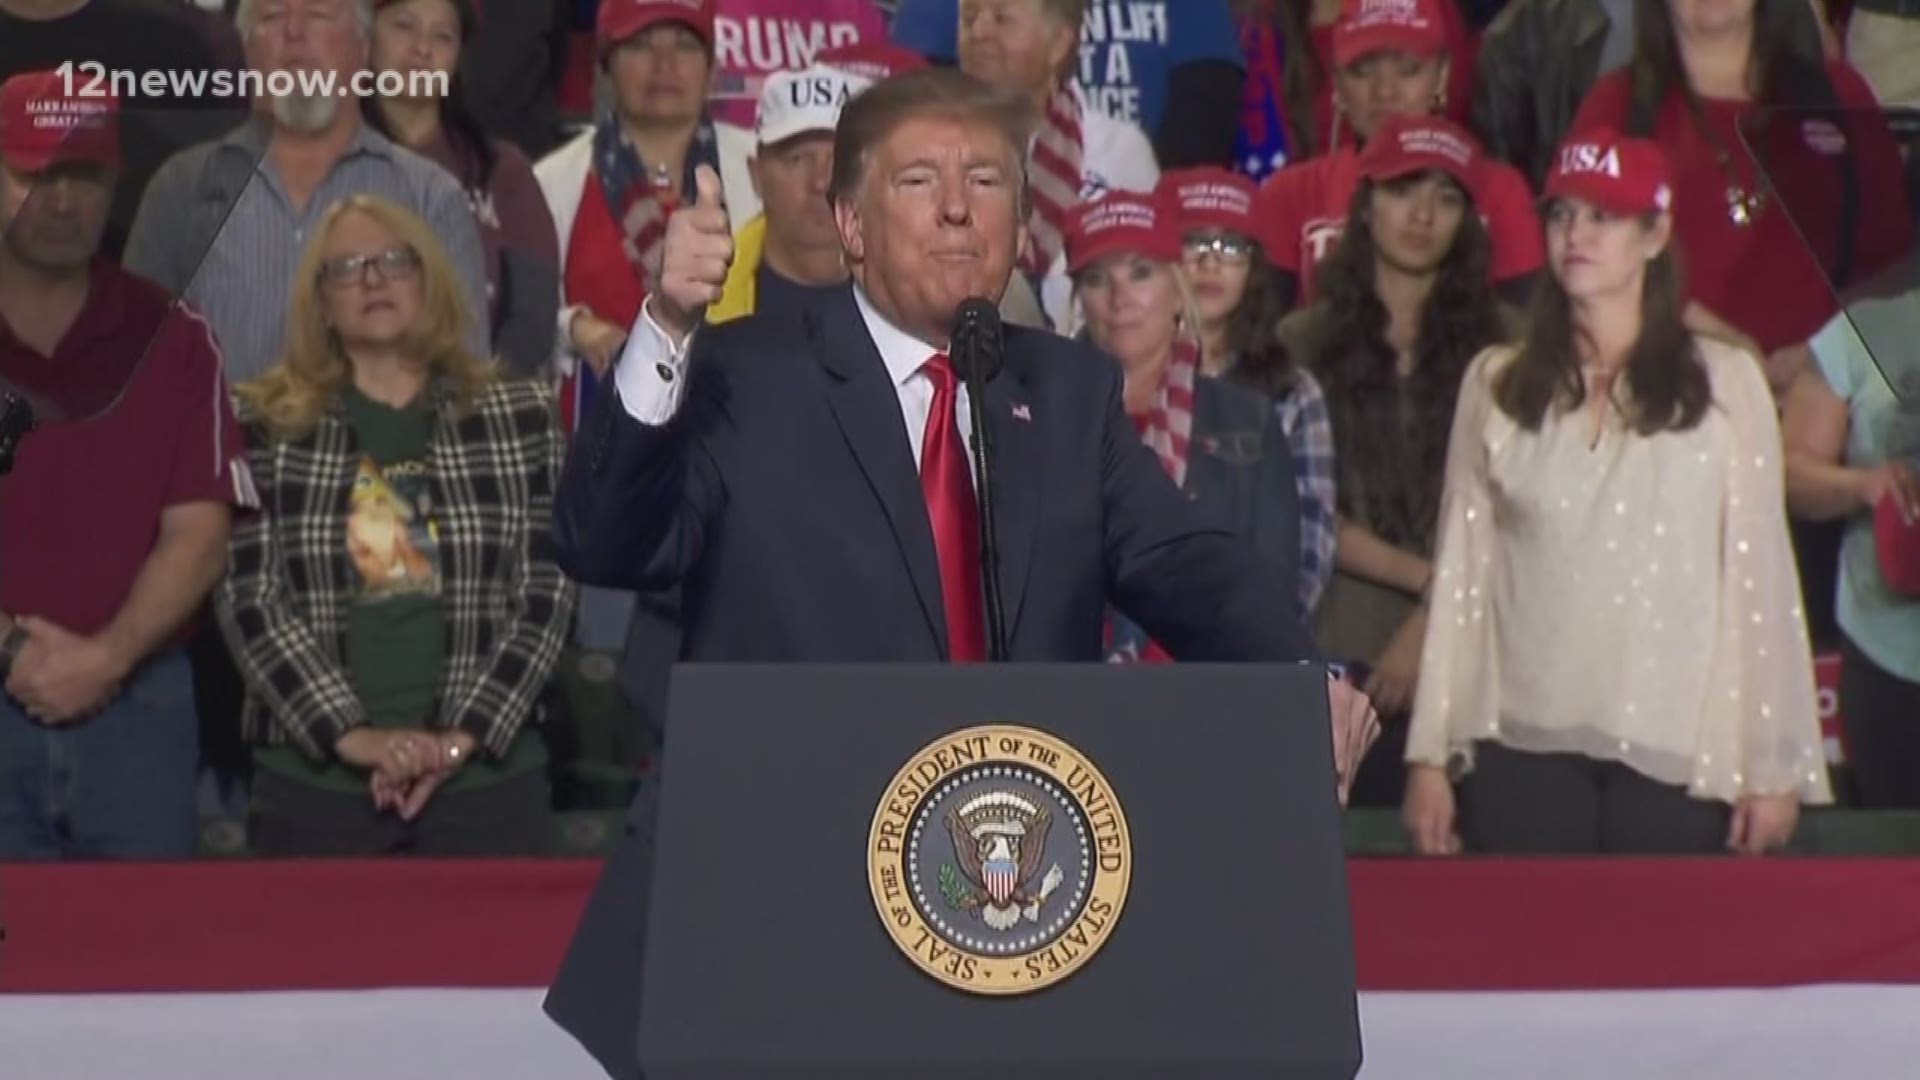 President Trump had several thousand people at his rally in El Paso where he would continue to push for his border wall, as well as take shots at Beto O'Rourke, who was also holding a rally in El Paso at the same time.